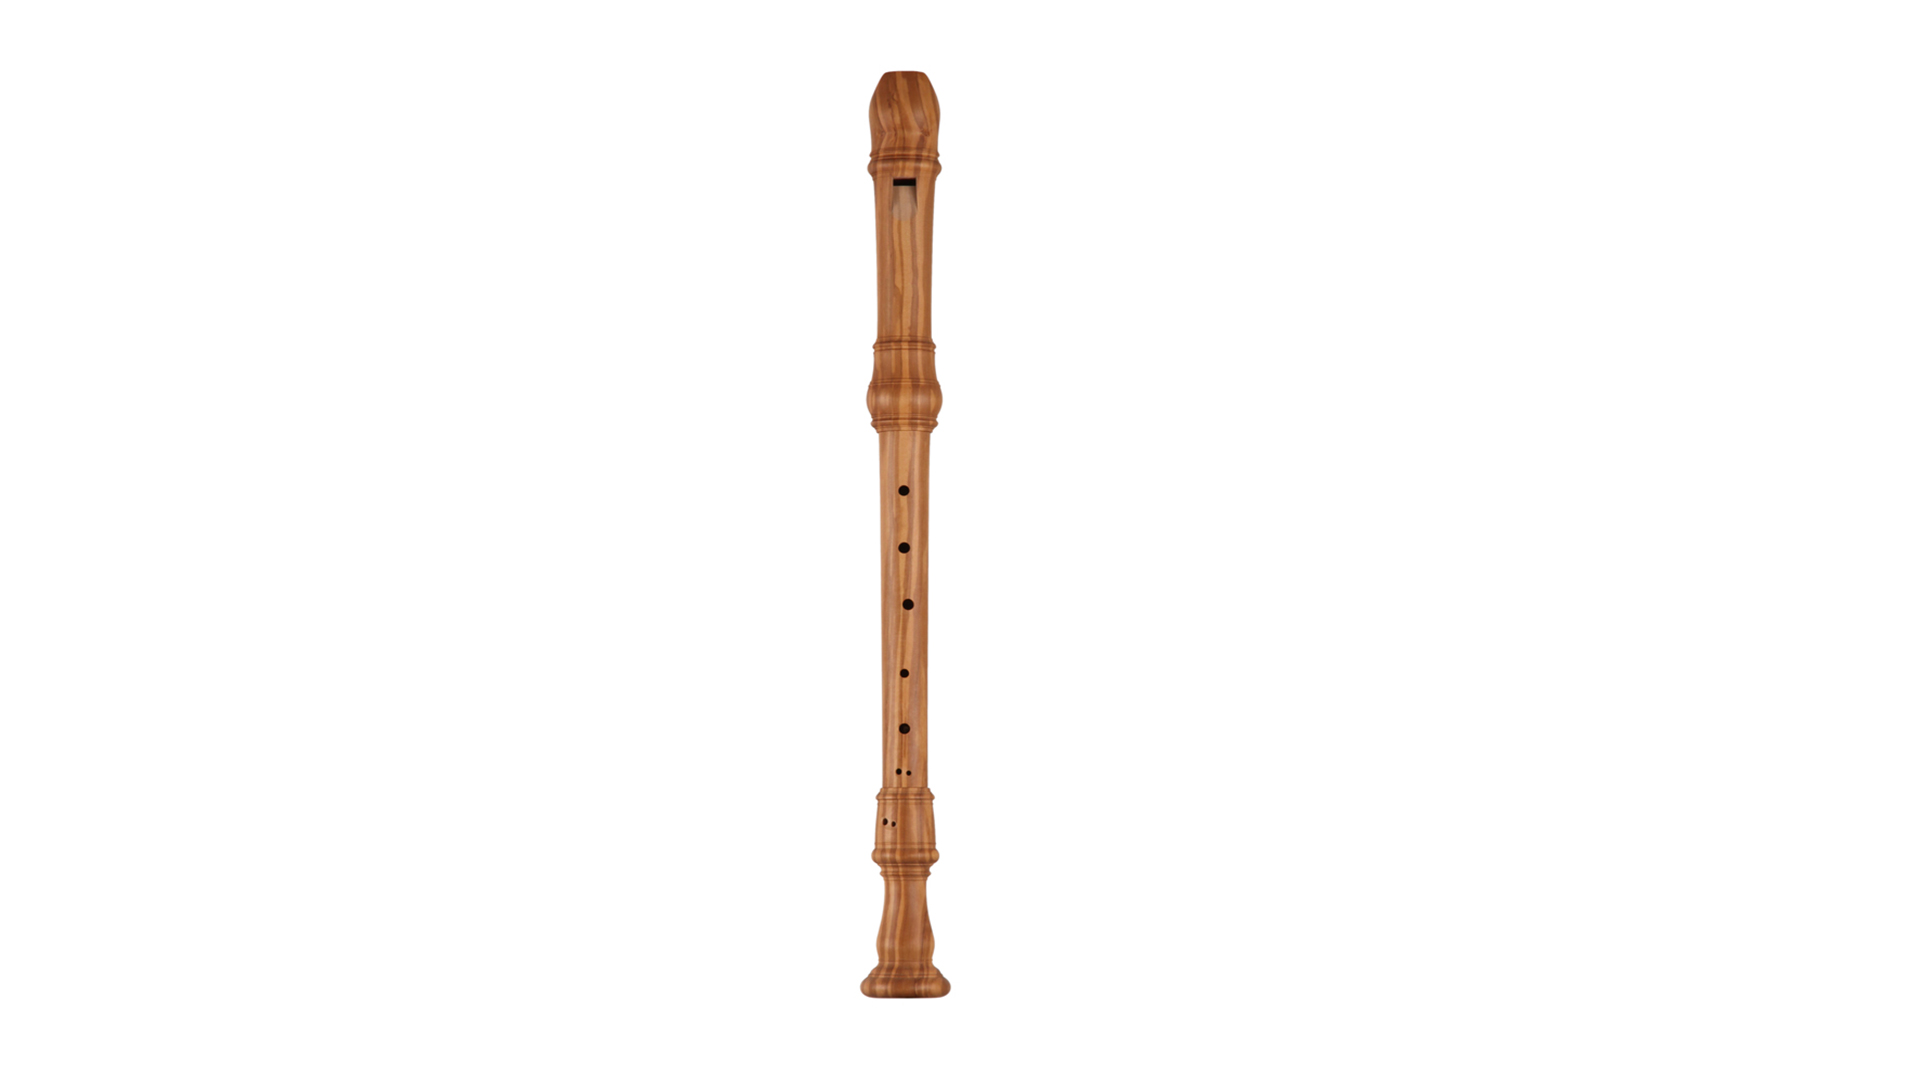 Küng, "Marsyas", tenor in c', baroque double hole, olive wood (on request)